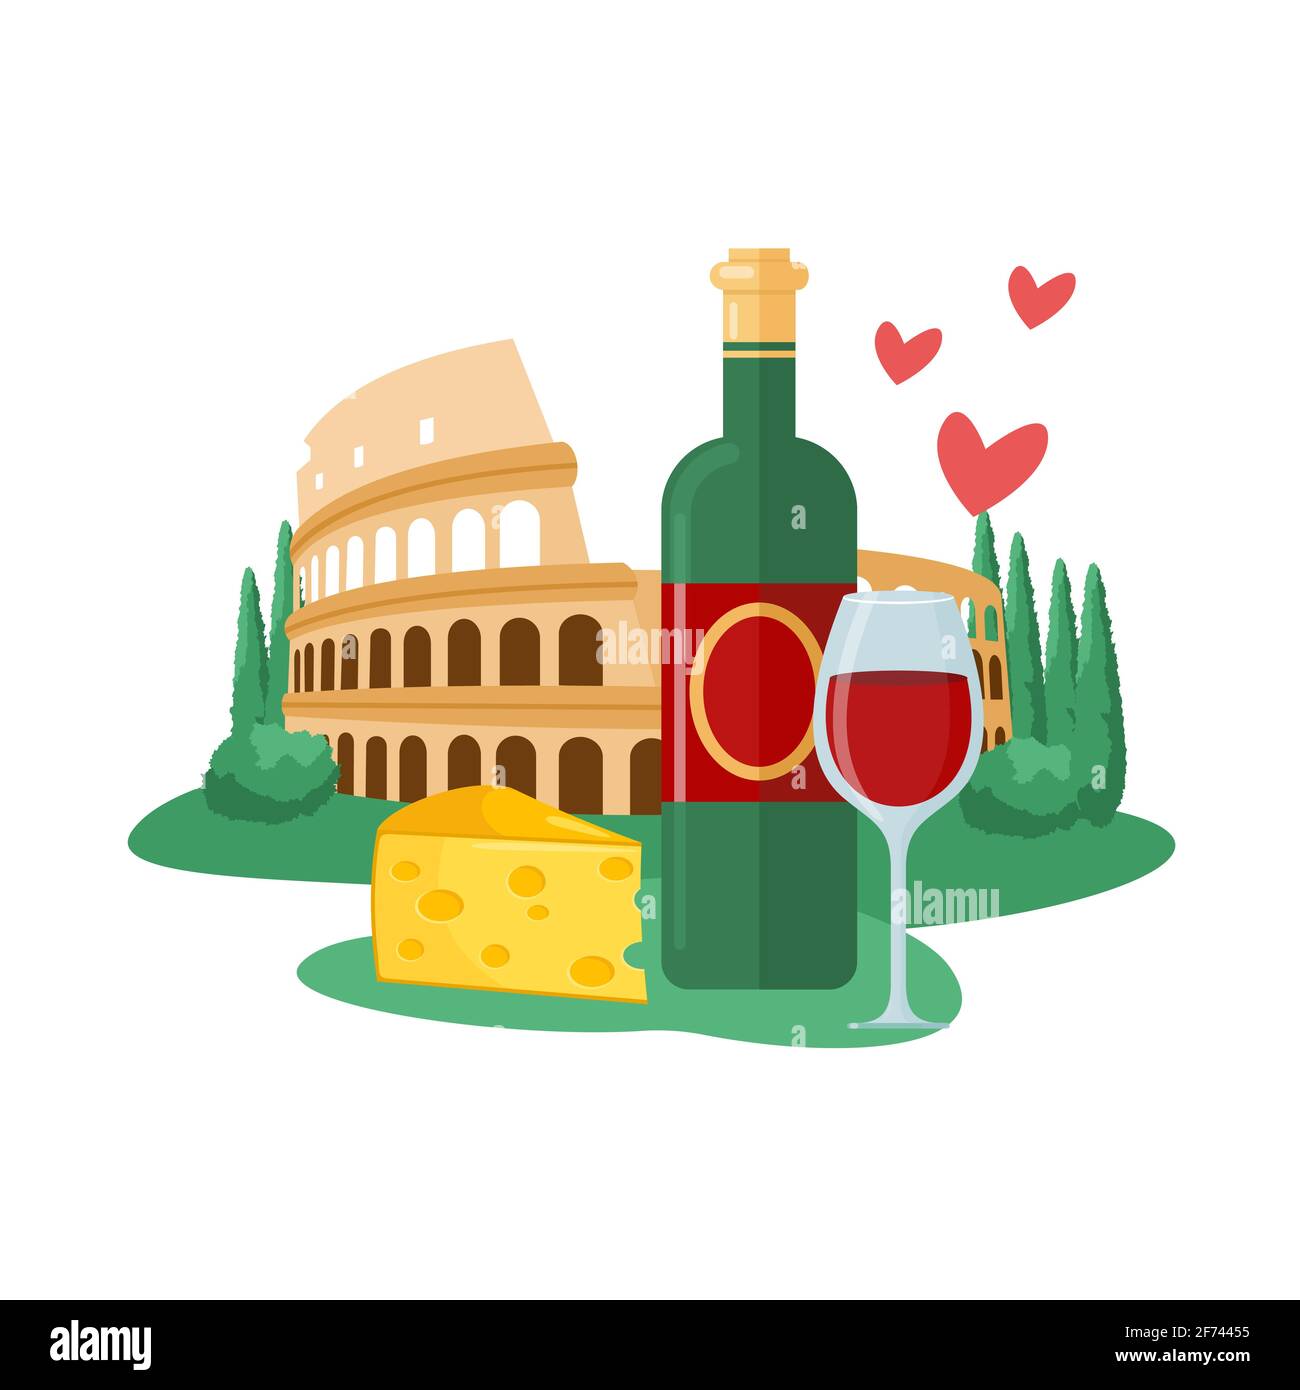 Travel to Italy, italian antique architecture landmark colosseum, bottle of wine, cheese Stock Vector